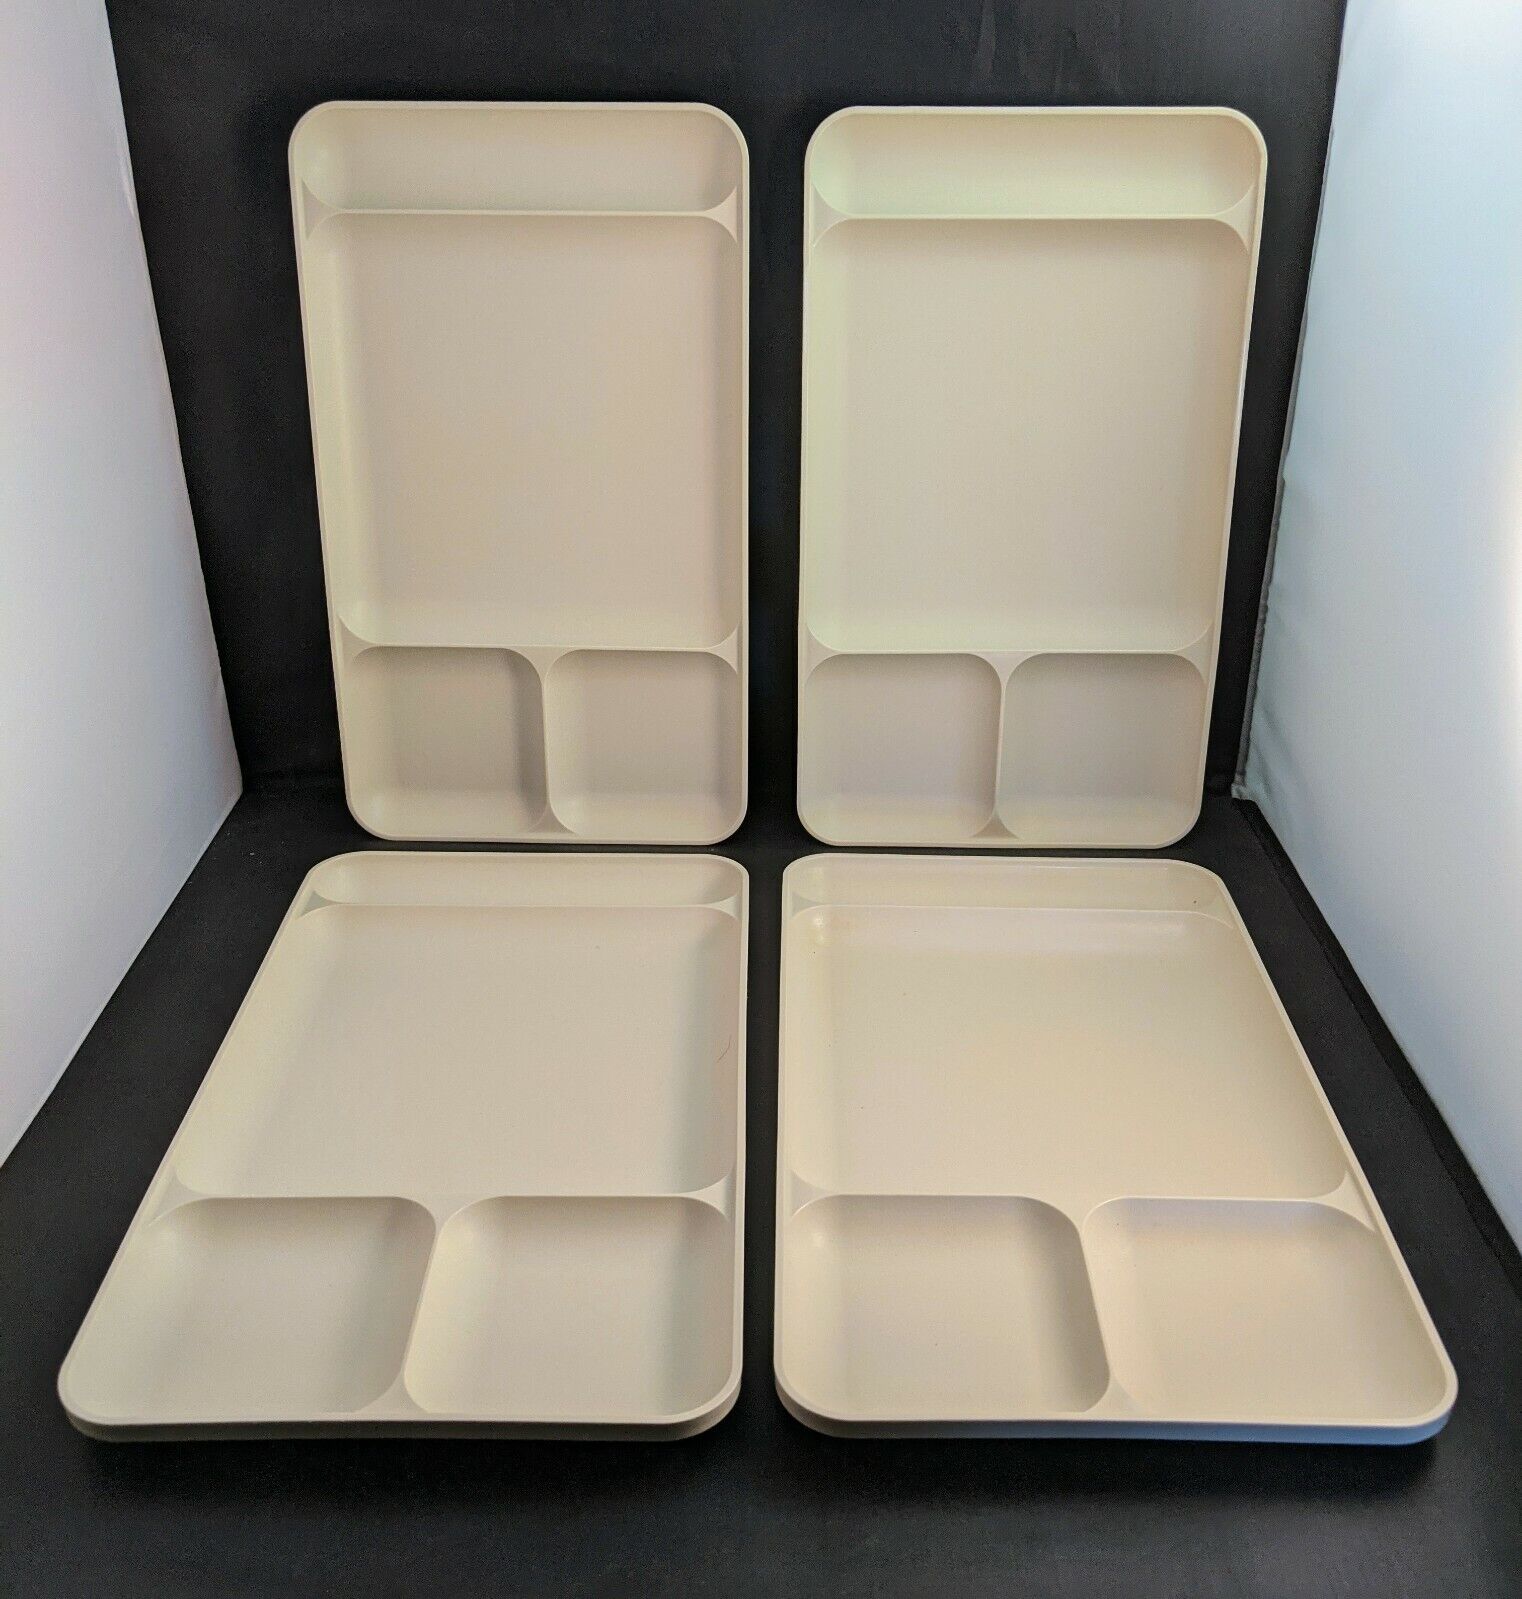 Tupperware Divided Food Trays Set of 4 #1535 Camping Tv Dinner Cafeteria Tray